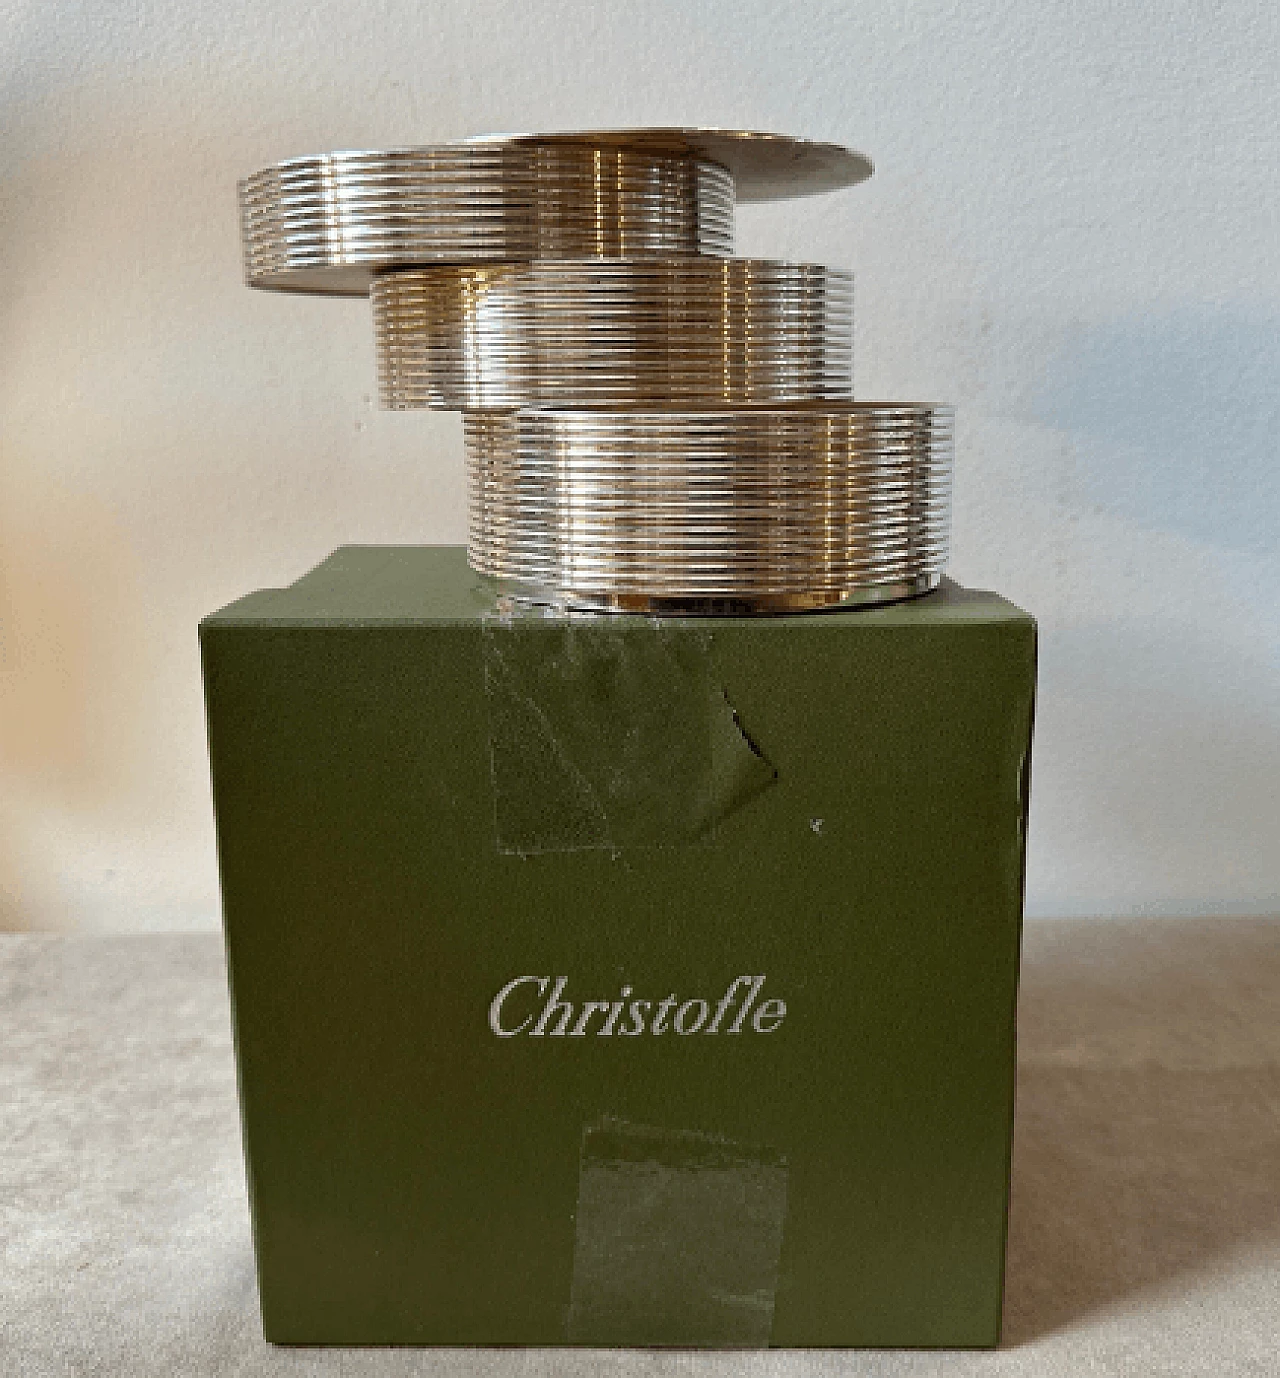 Jewelry box by Thomas Keller and Adam Tihany for Christofle, 1998 9